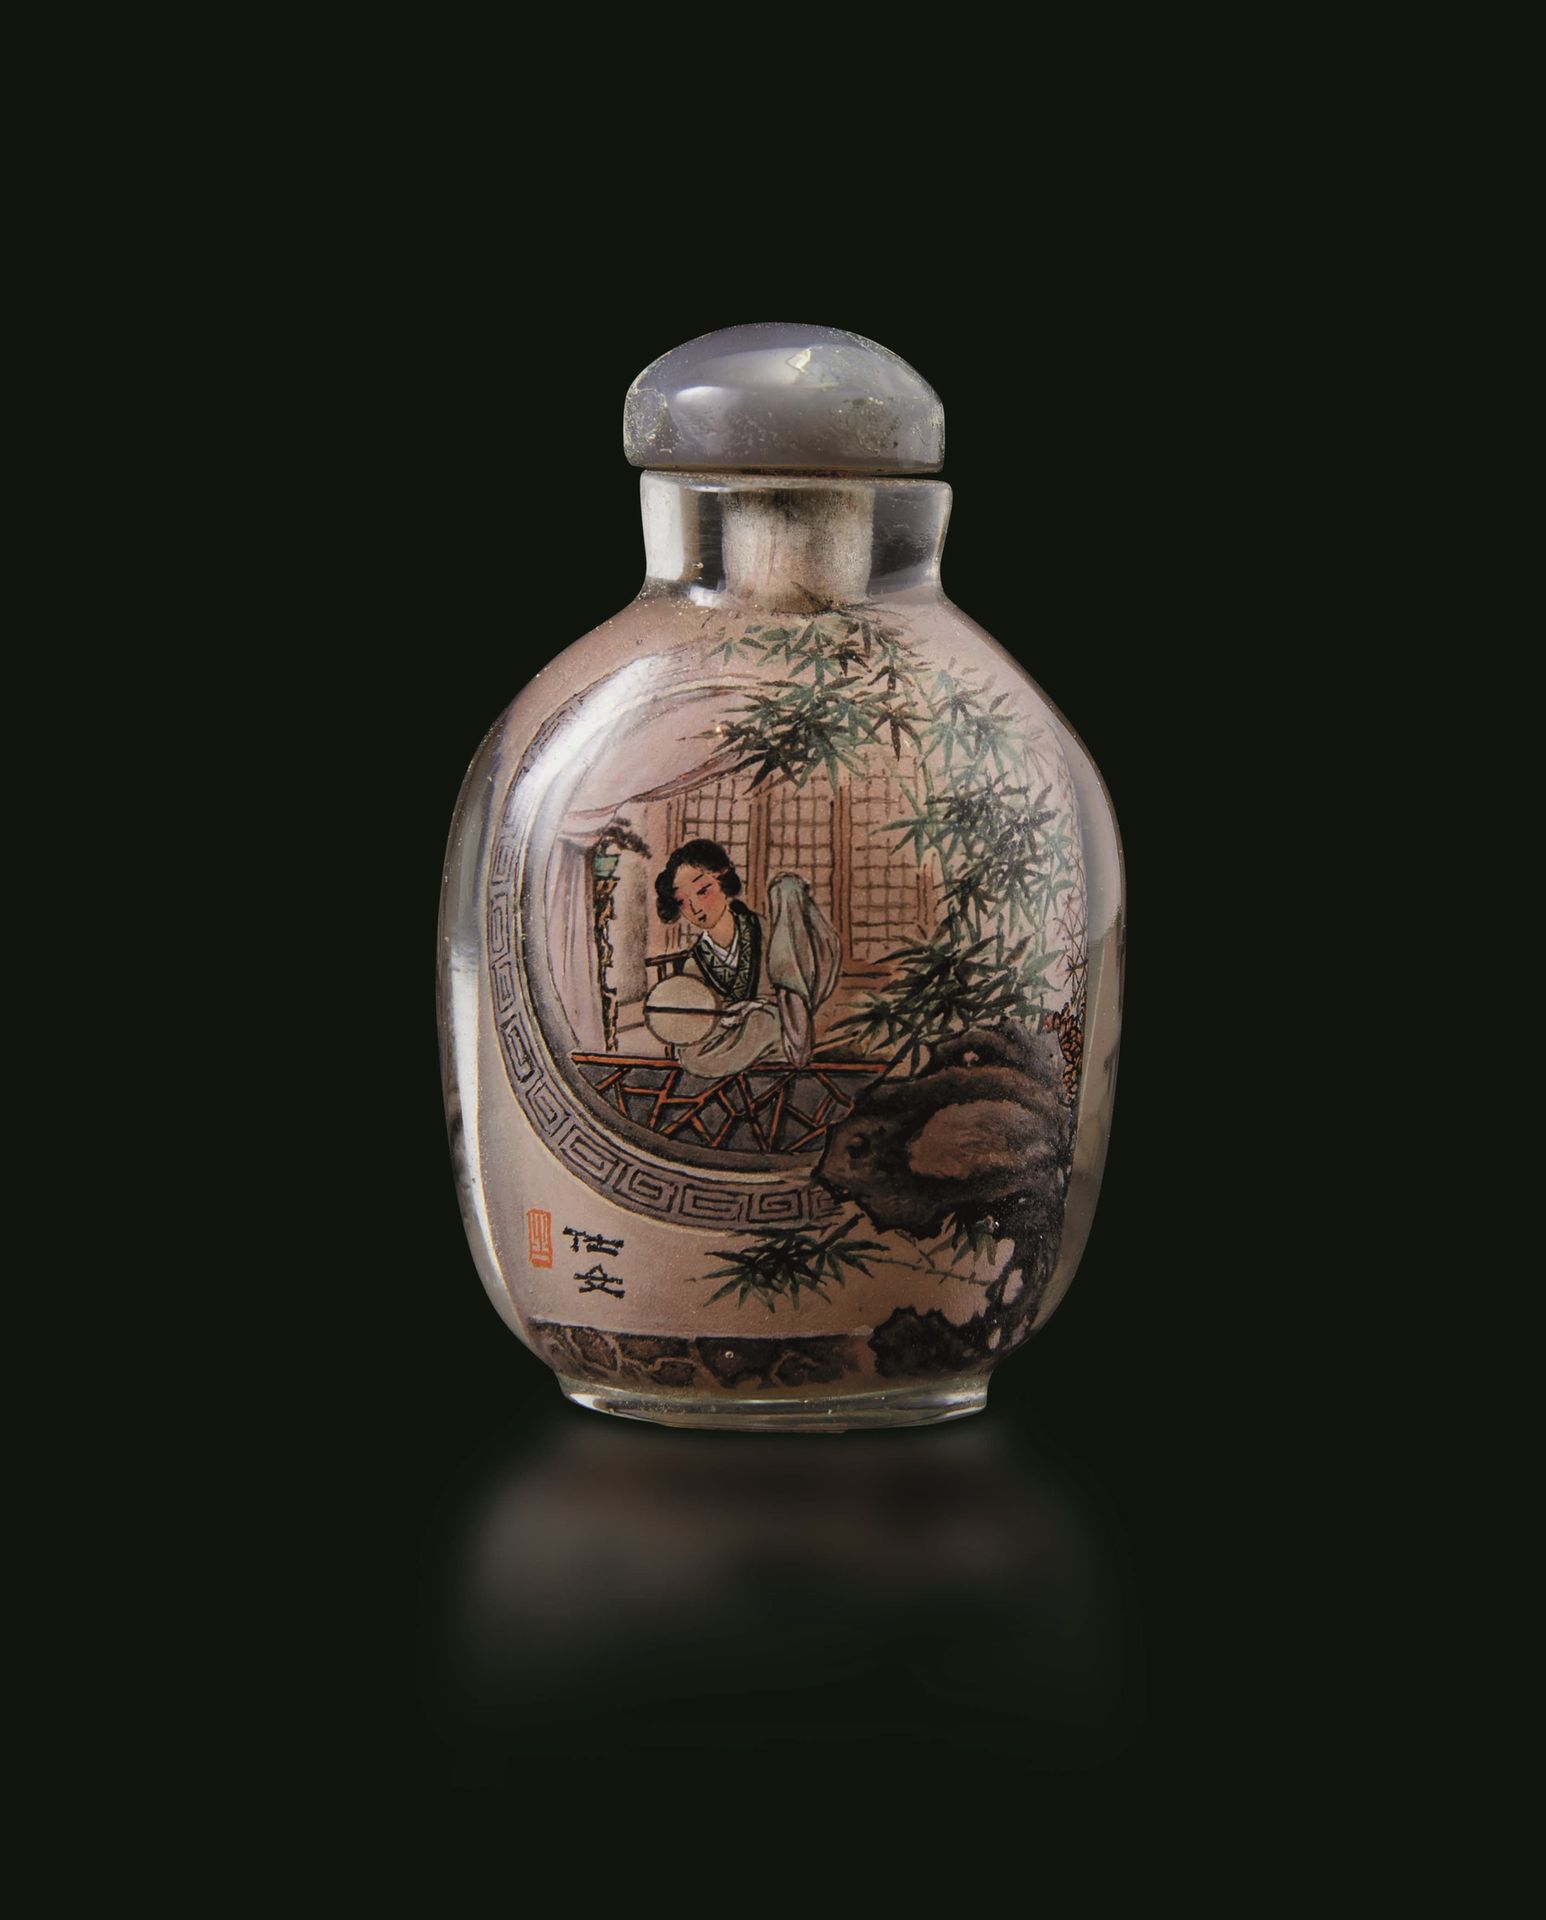 A glass snuff bottle, China, 1900s 高7厘米